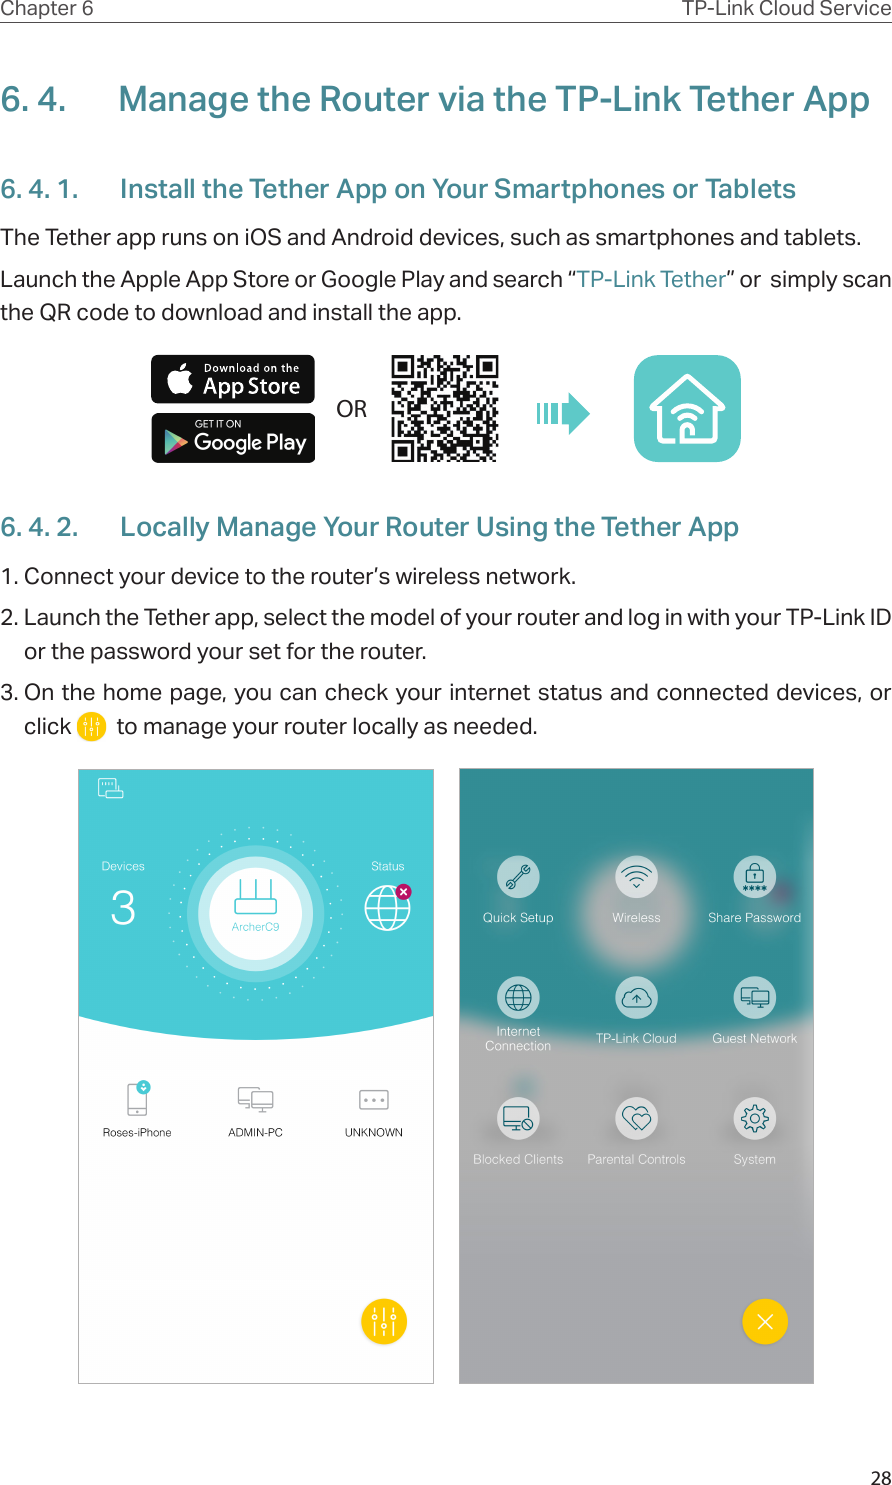 28Chapter 6 TP-Link Cloud Service6. 4.  Manage the Router via the TP-Link Tether App6. 4. 1.  Install the Tether App on Your Smartphones or TabletsThe Tether app runs on iOS and Android devices, such as smartphones and tablets.Launch the Apple App Store or Google Play and search “TP-Link Tether” or  simply scan the QR code to download and install the app.OR6. 4. 2.  Locally Manage Your Router Using the Tether App1. Connect your device to the router’s wireless network.2. Launch the Tether app, select the model of your router and log in with your TP-Link ID or the password your set for the router. 3. On the home page, you can check your internet status and connected devices, or click    to manage your router locally as needed.     